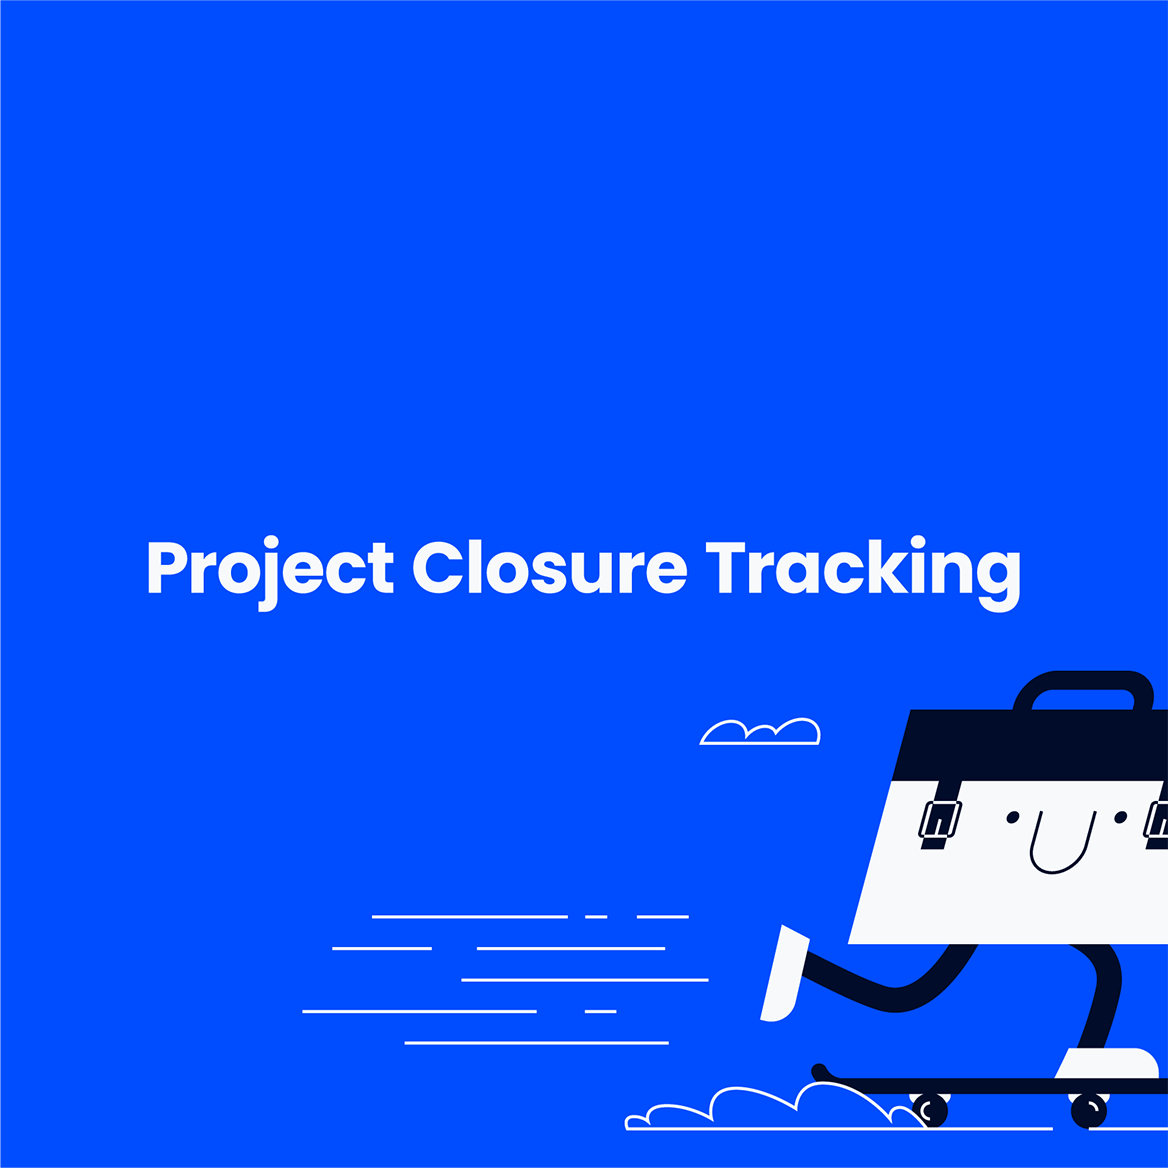 Templates-Project Closure Tracking